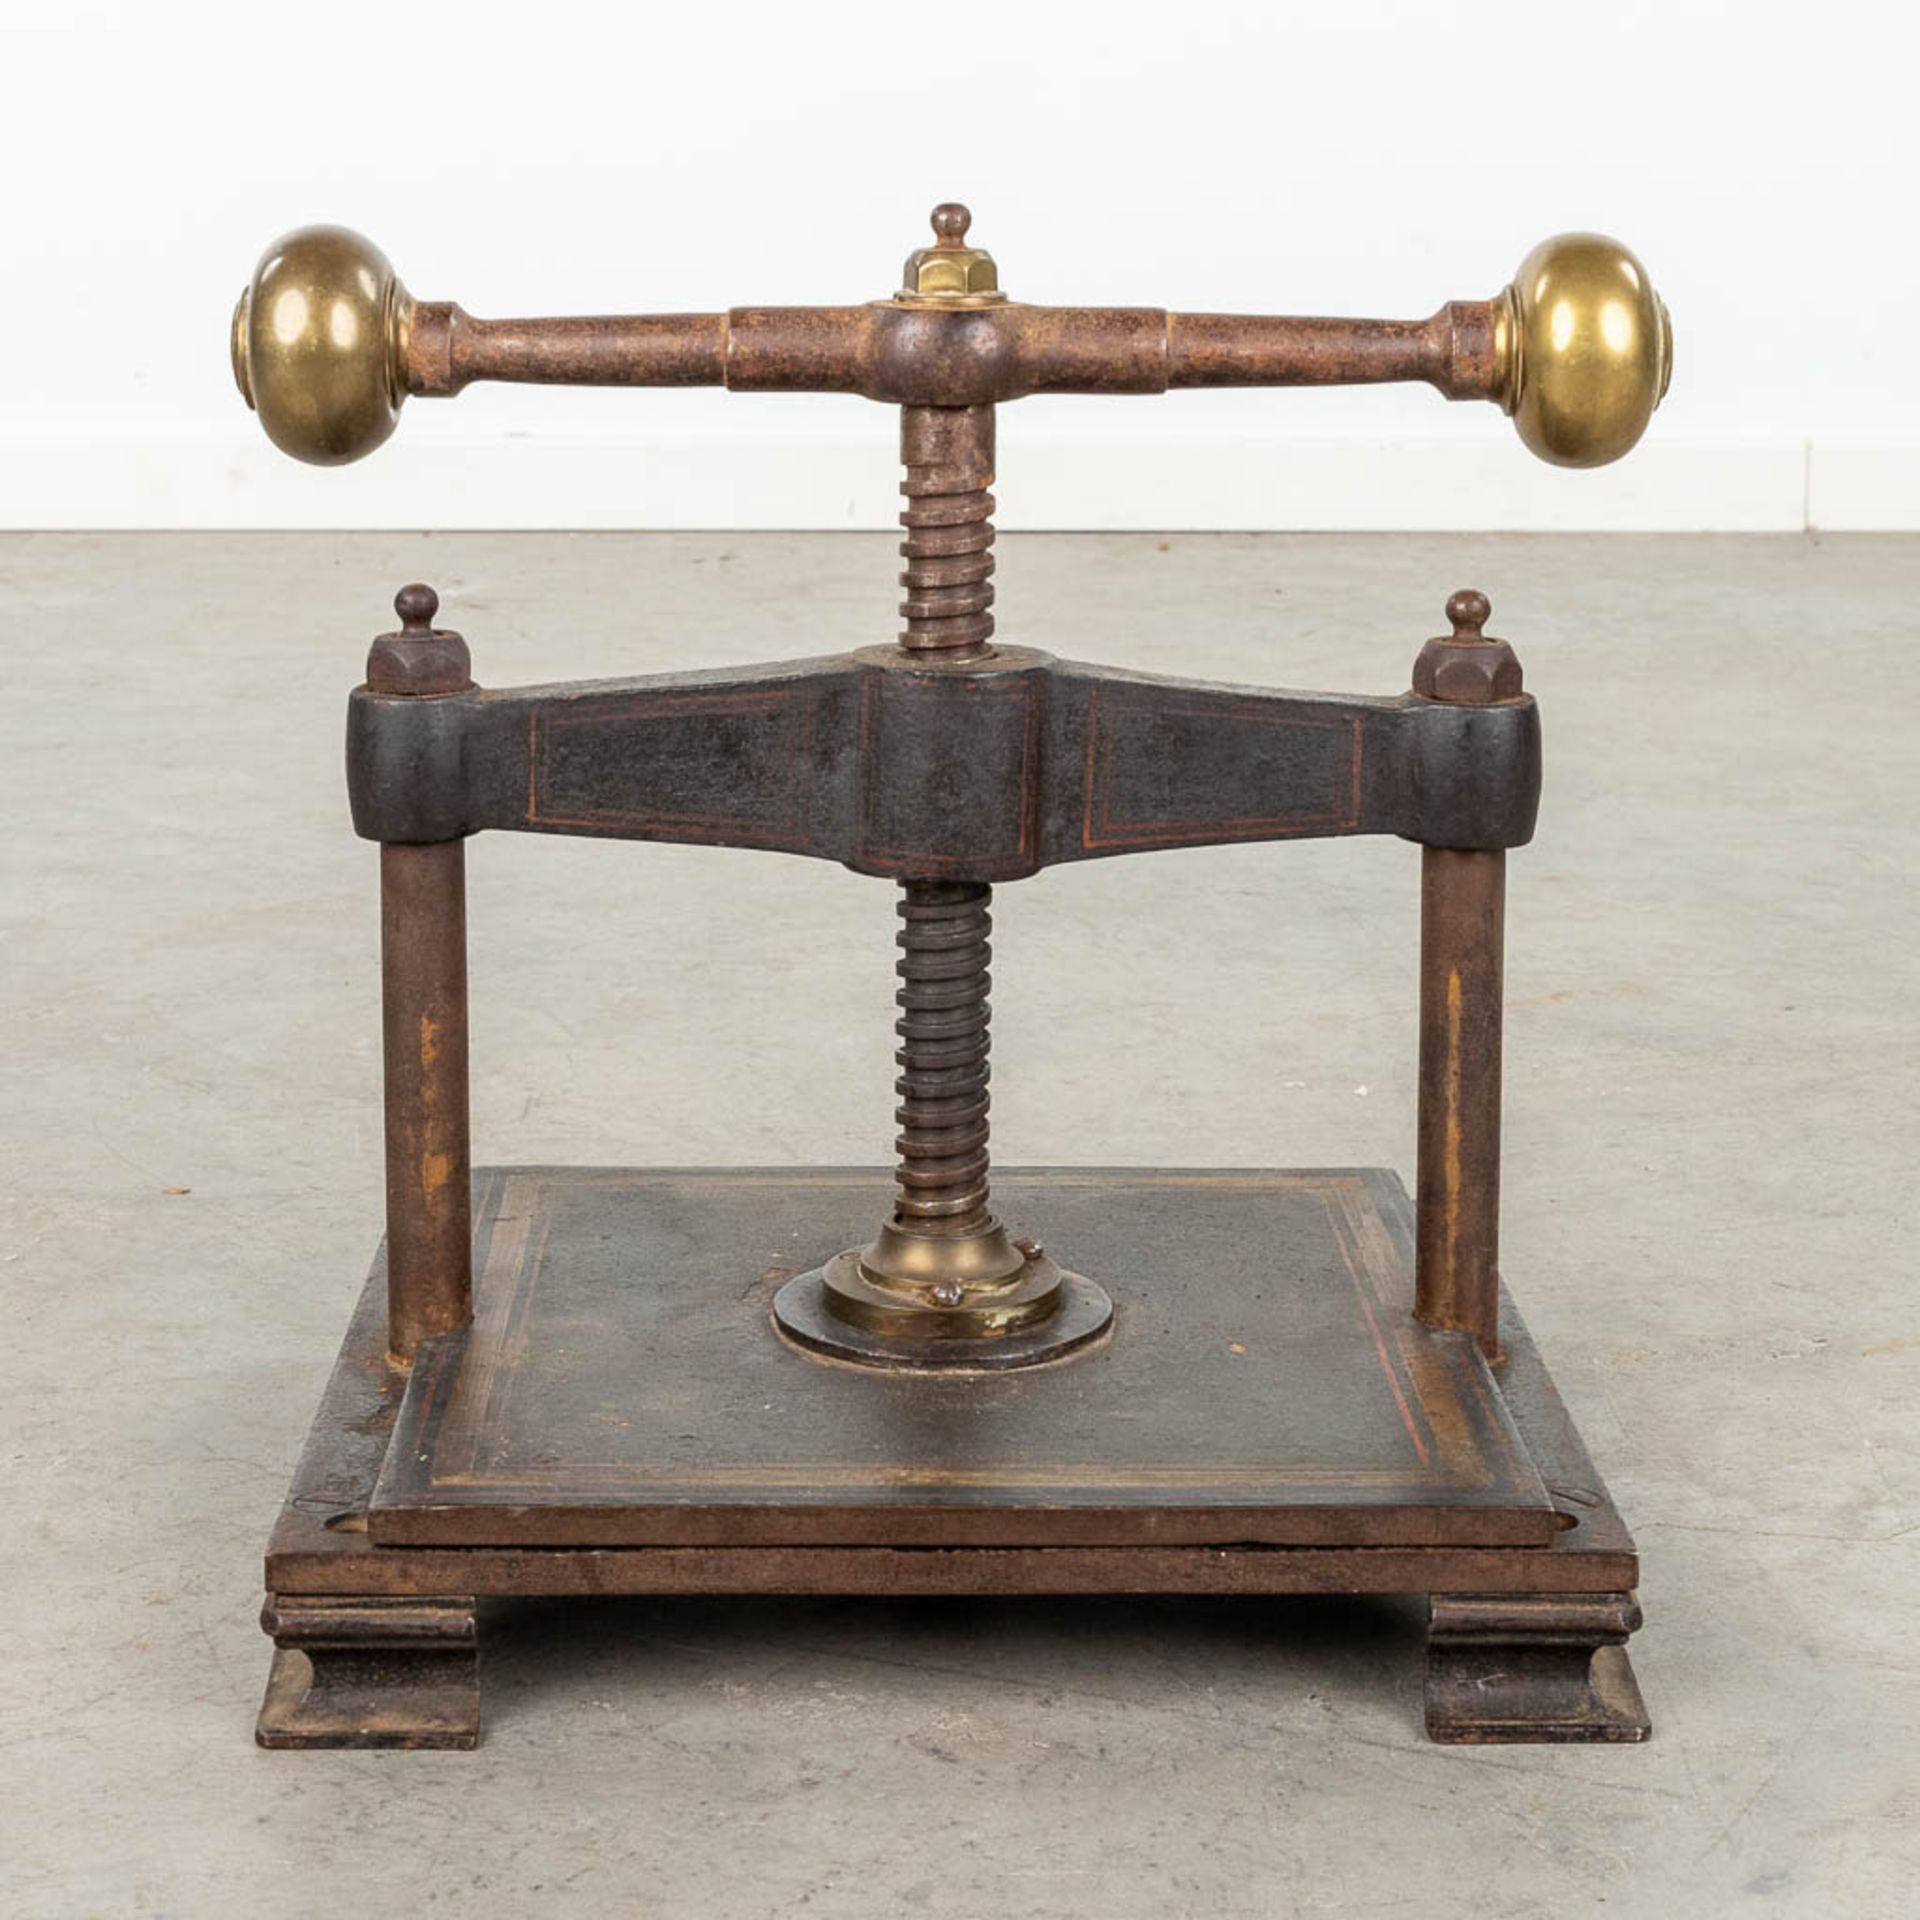 An antique book press, made of metal. (L:30 x W:38 x H:36 cm) - Image 3 of 11